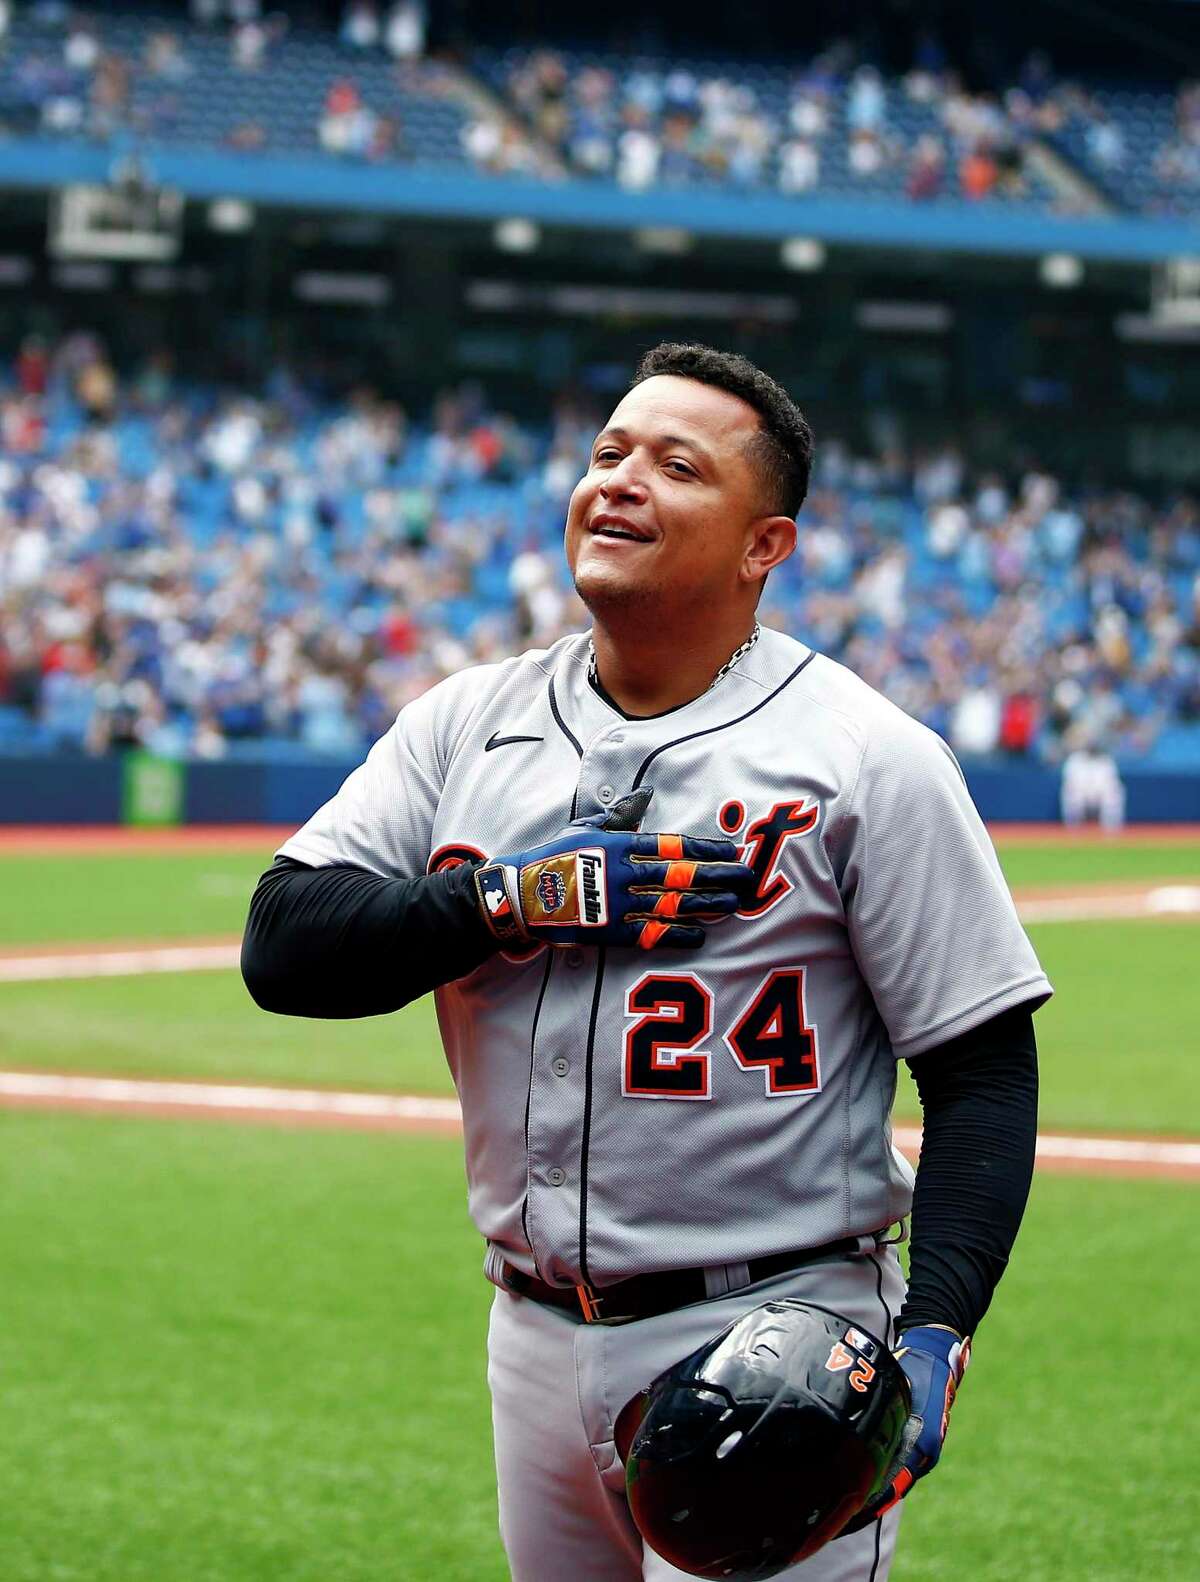 TORONTO, ON - AUGUST 22: Miguel Cabrera #24 of the Detroit Tigers celebrates after hitting his 500th career home run in the sixth inning during a MLB game against the Toronto Blue Jays at Rogers Centre on August 22, 2021 in Toronto, Ontario, Canada. (Photo by Vaughn Ridley/Getty Images)